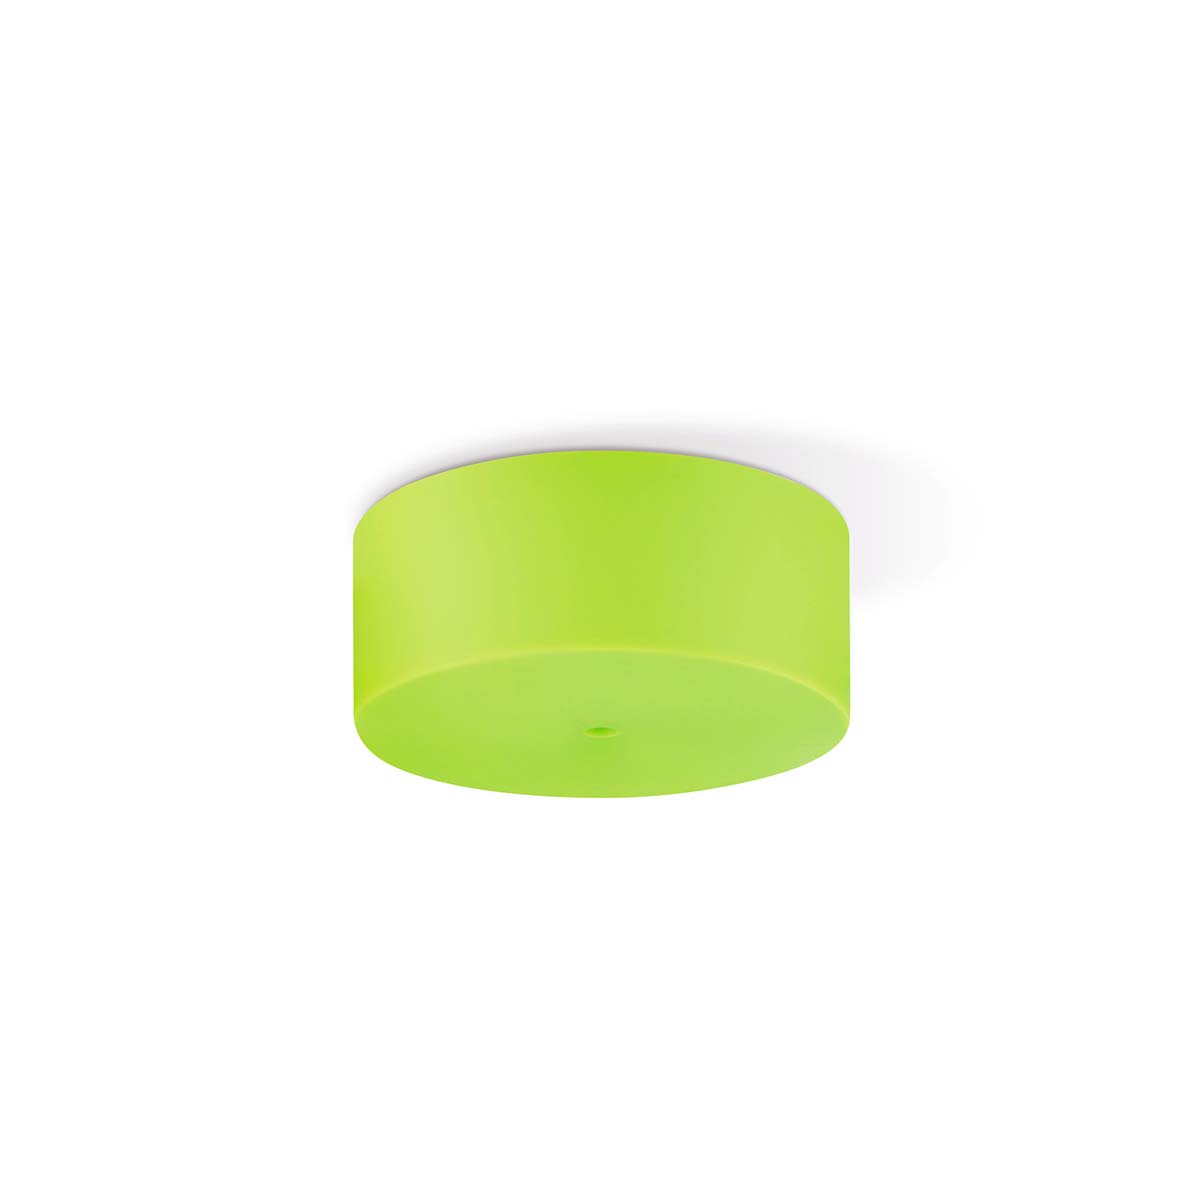 Tangla lighting - TLCP022-01FG - Silicon 1 Light round canopy cylinder - fruit green